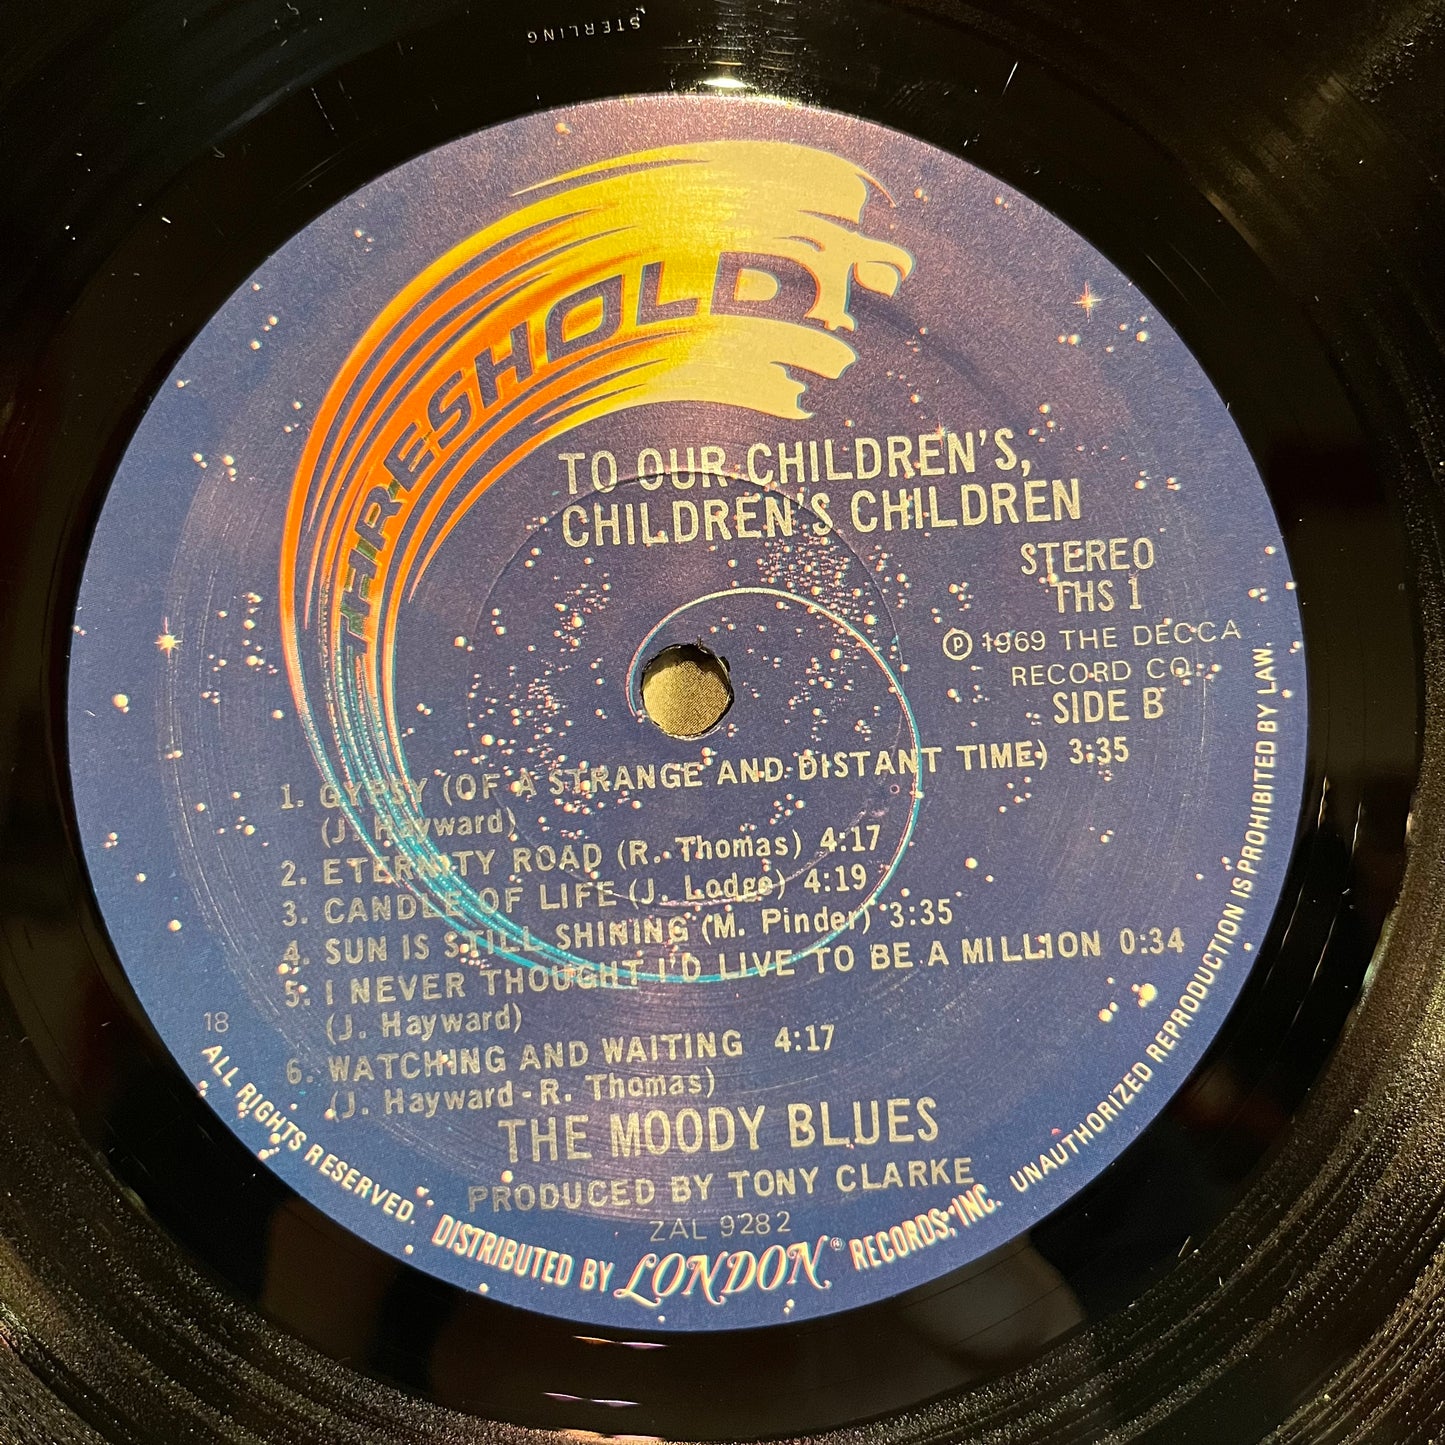 The Moody Blues To Our Children's Children's Children *PRESSWELL* LP Near Mint (NM or M-) Near Mint (NM or M-)